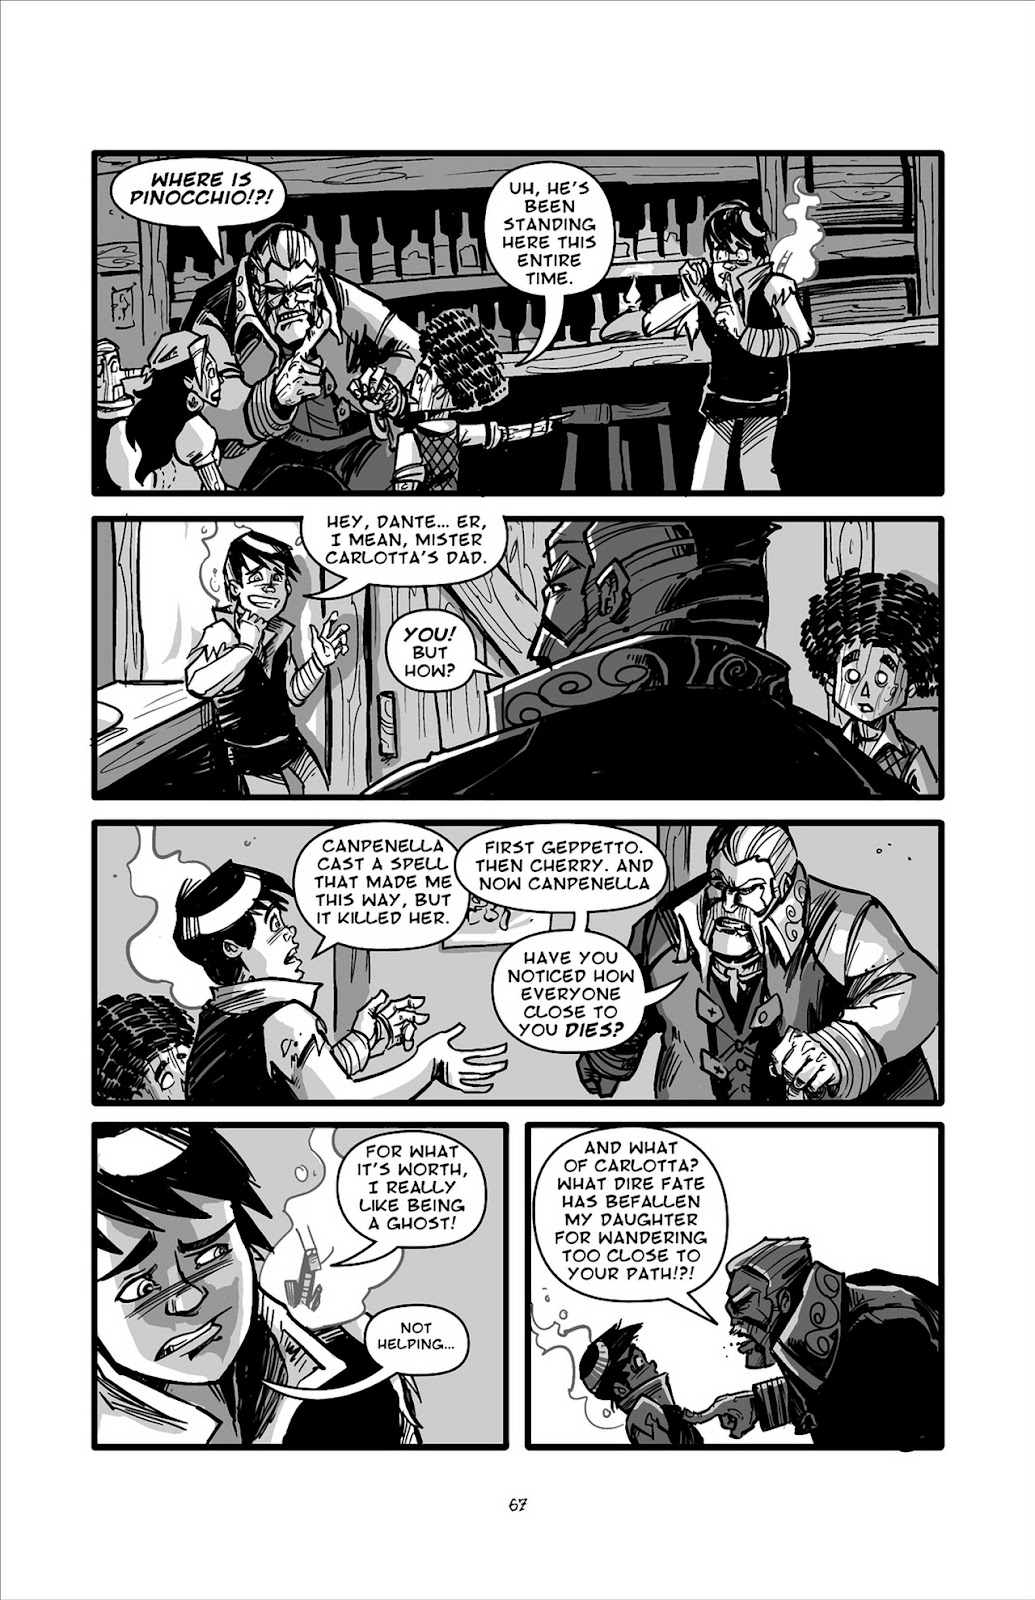 Pinocchio: Vampire Slayer - Of Wood and Blood issue 3 - Page 18